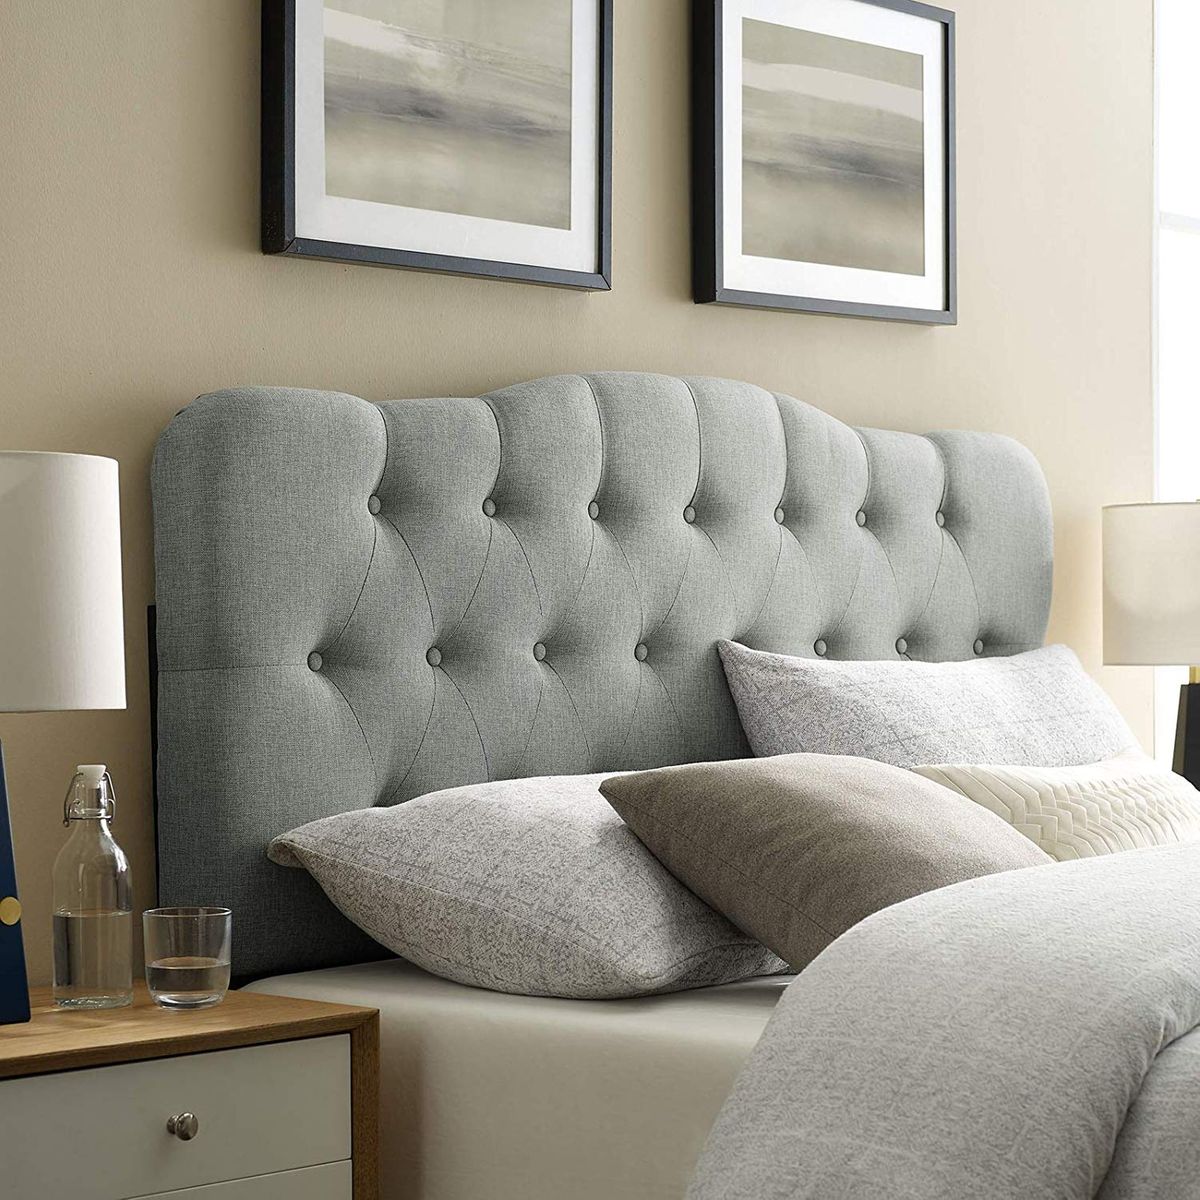 12 Best Headboards 2019 The Strategist, Cushion For Bed Frame